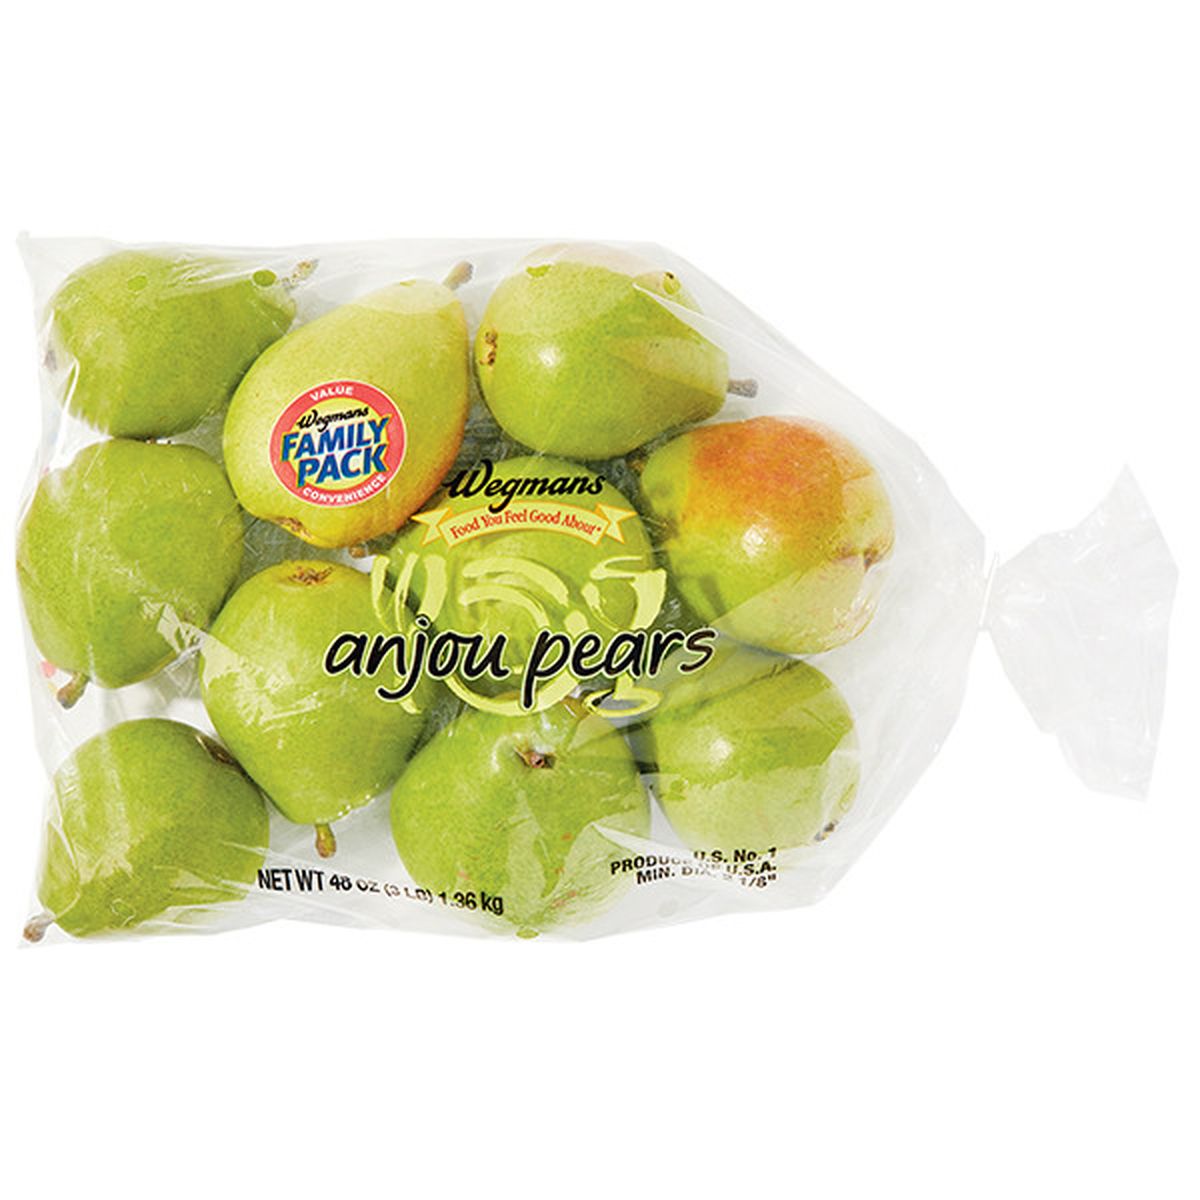 Calories in Wegmans Anjou Pears, FAMILY PACK